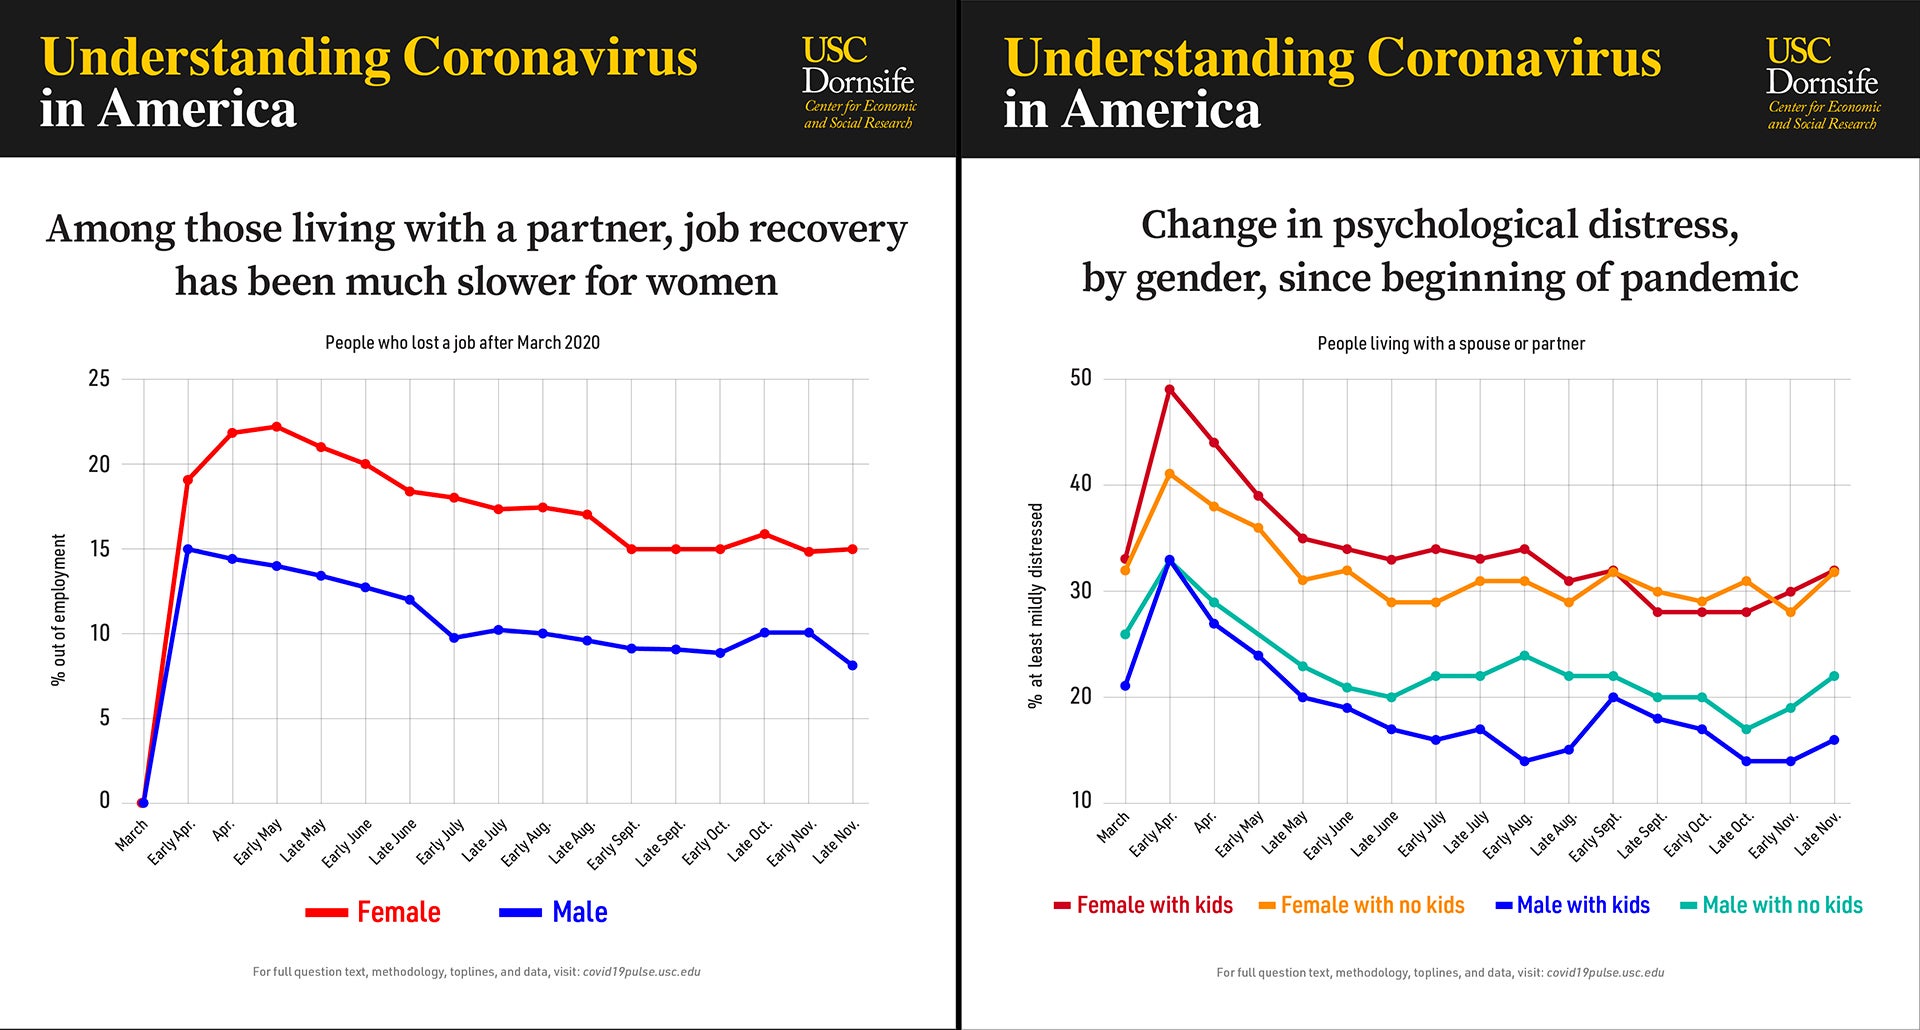 Side-by-side line graphs. The left graph compares changes to unemployment rates among women and men.The right graph compares psychological suffering among women and men with and without children. 